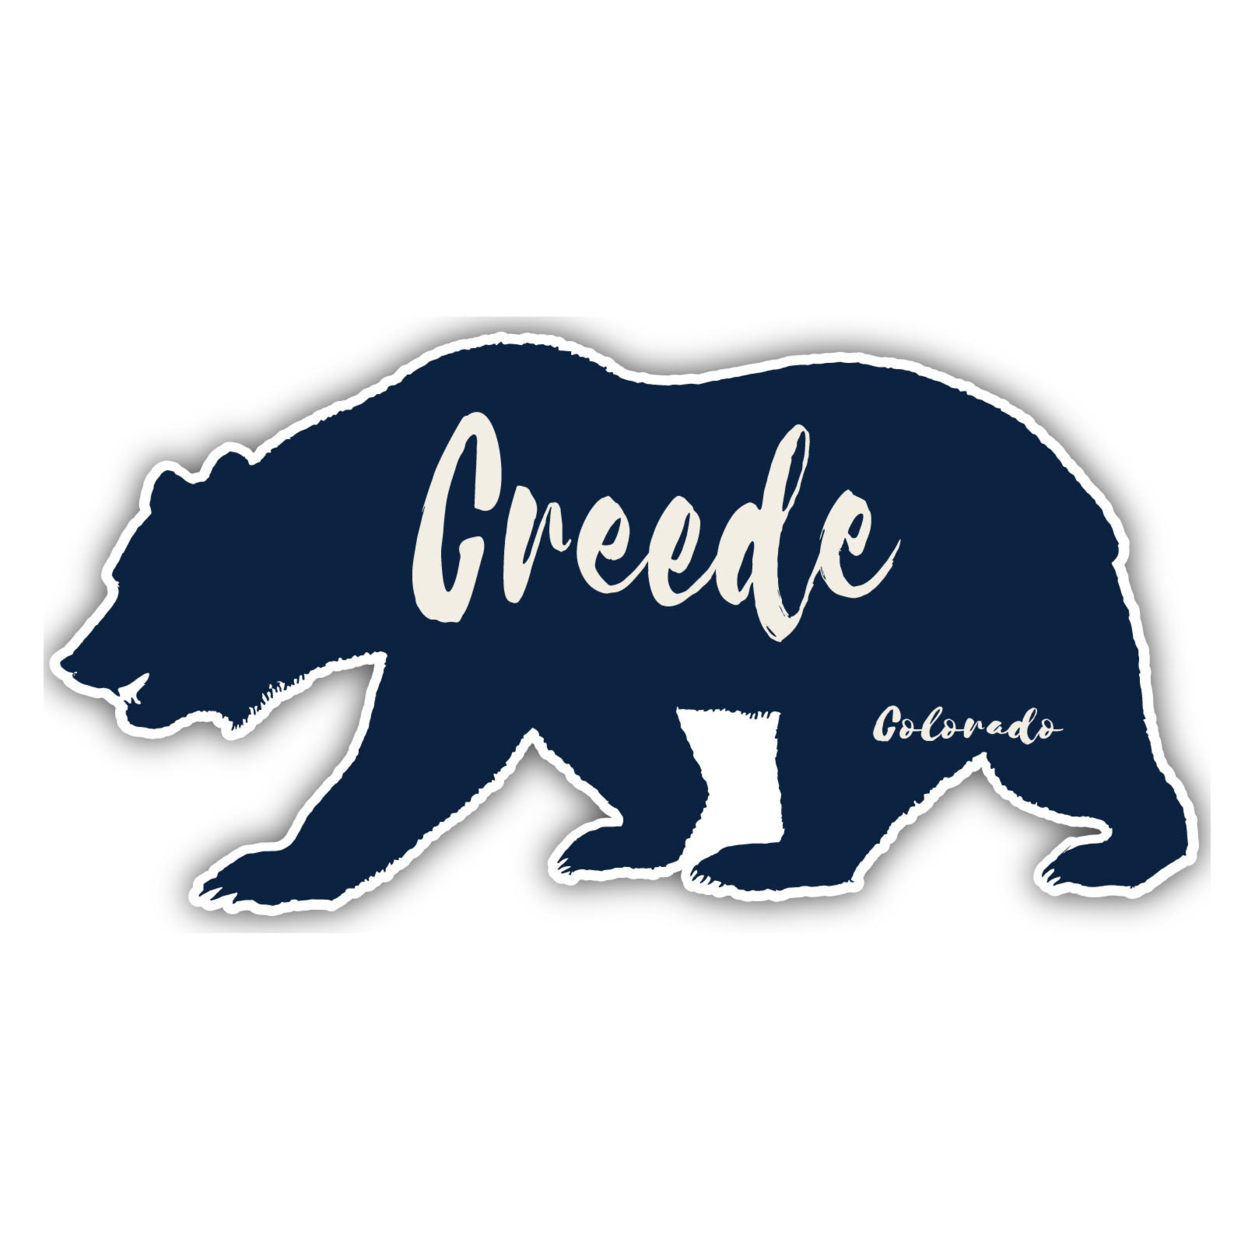 Creede Colorado Souvenir Decorative Stickers (Choose Theme And Size) - 4-Pack, 6-Inch, Bear